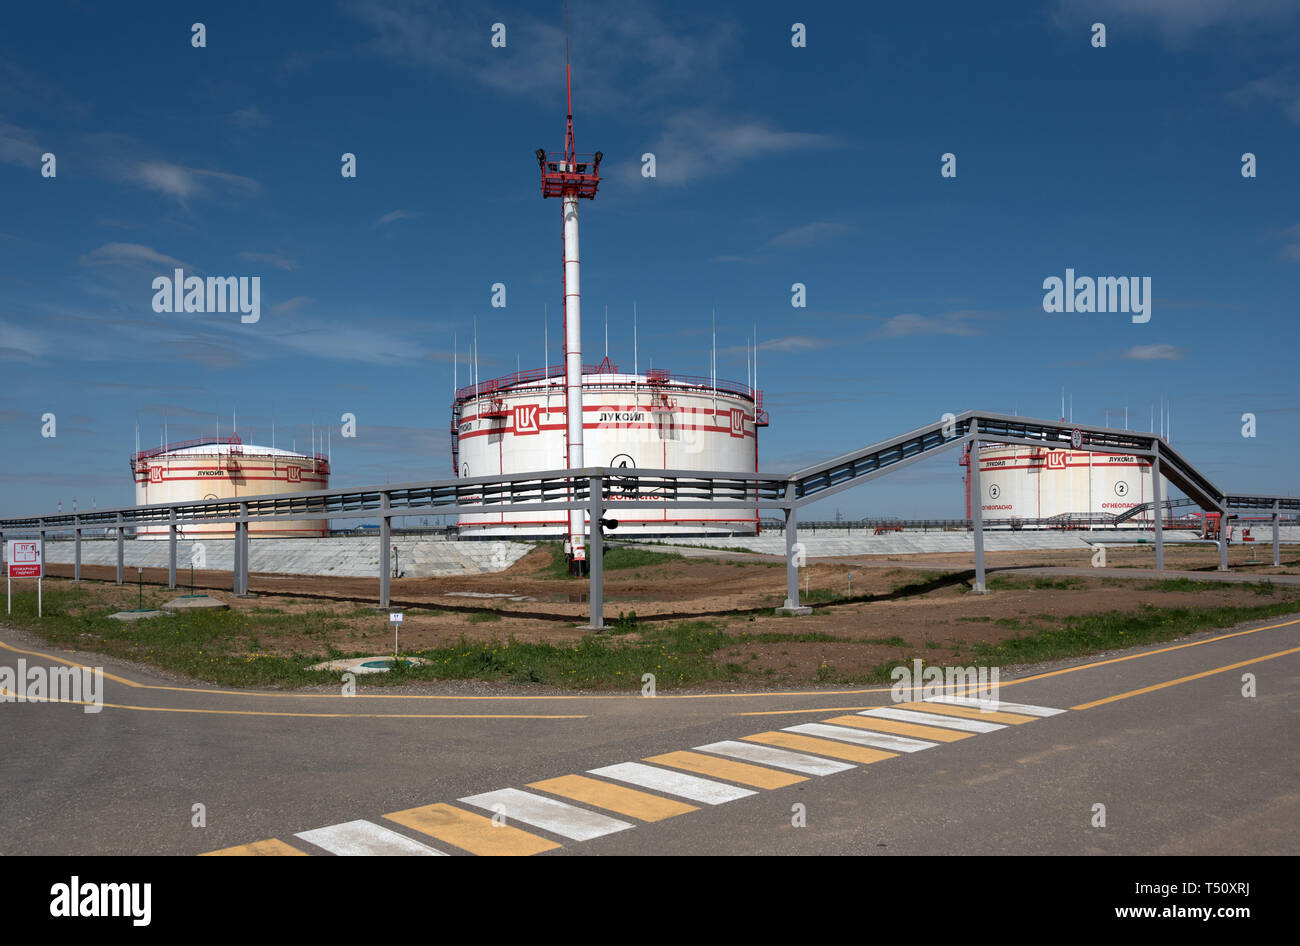 Oil terminals of LUKOIL company in the Kalmykia, Russia Stock Photo